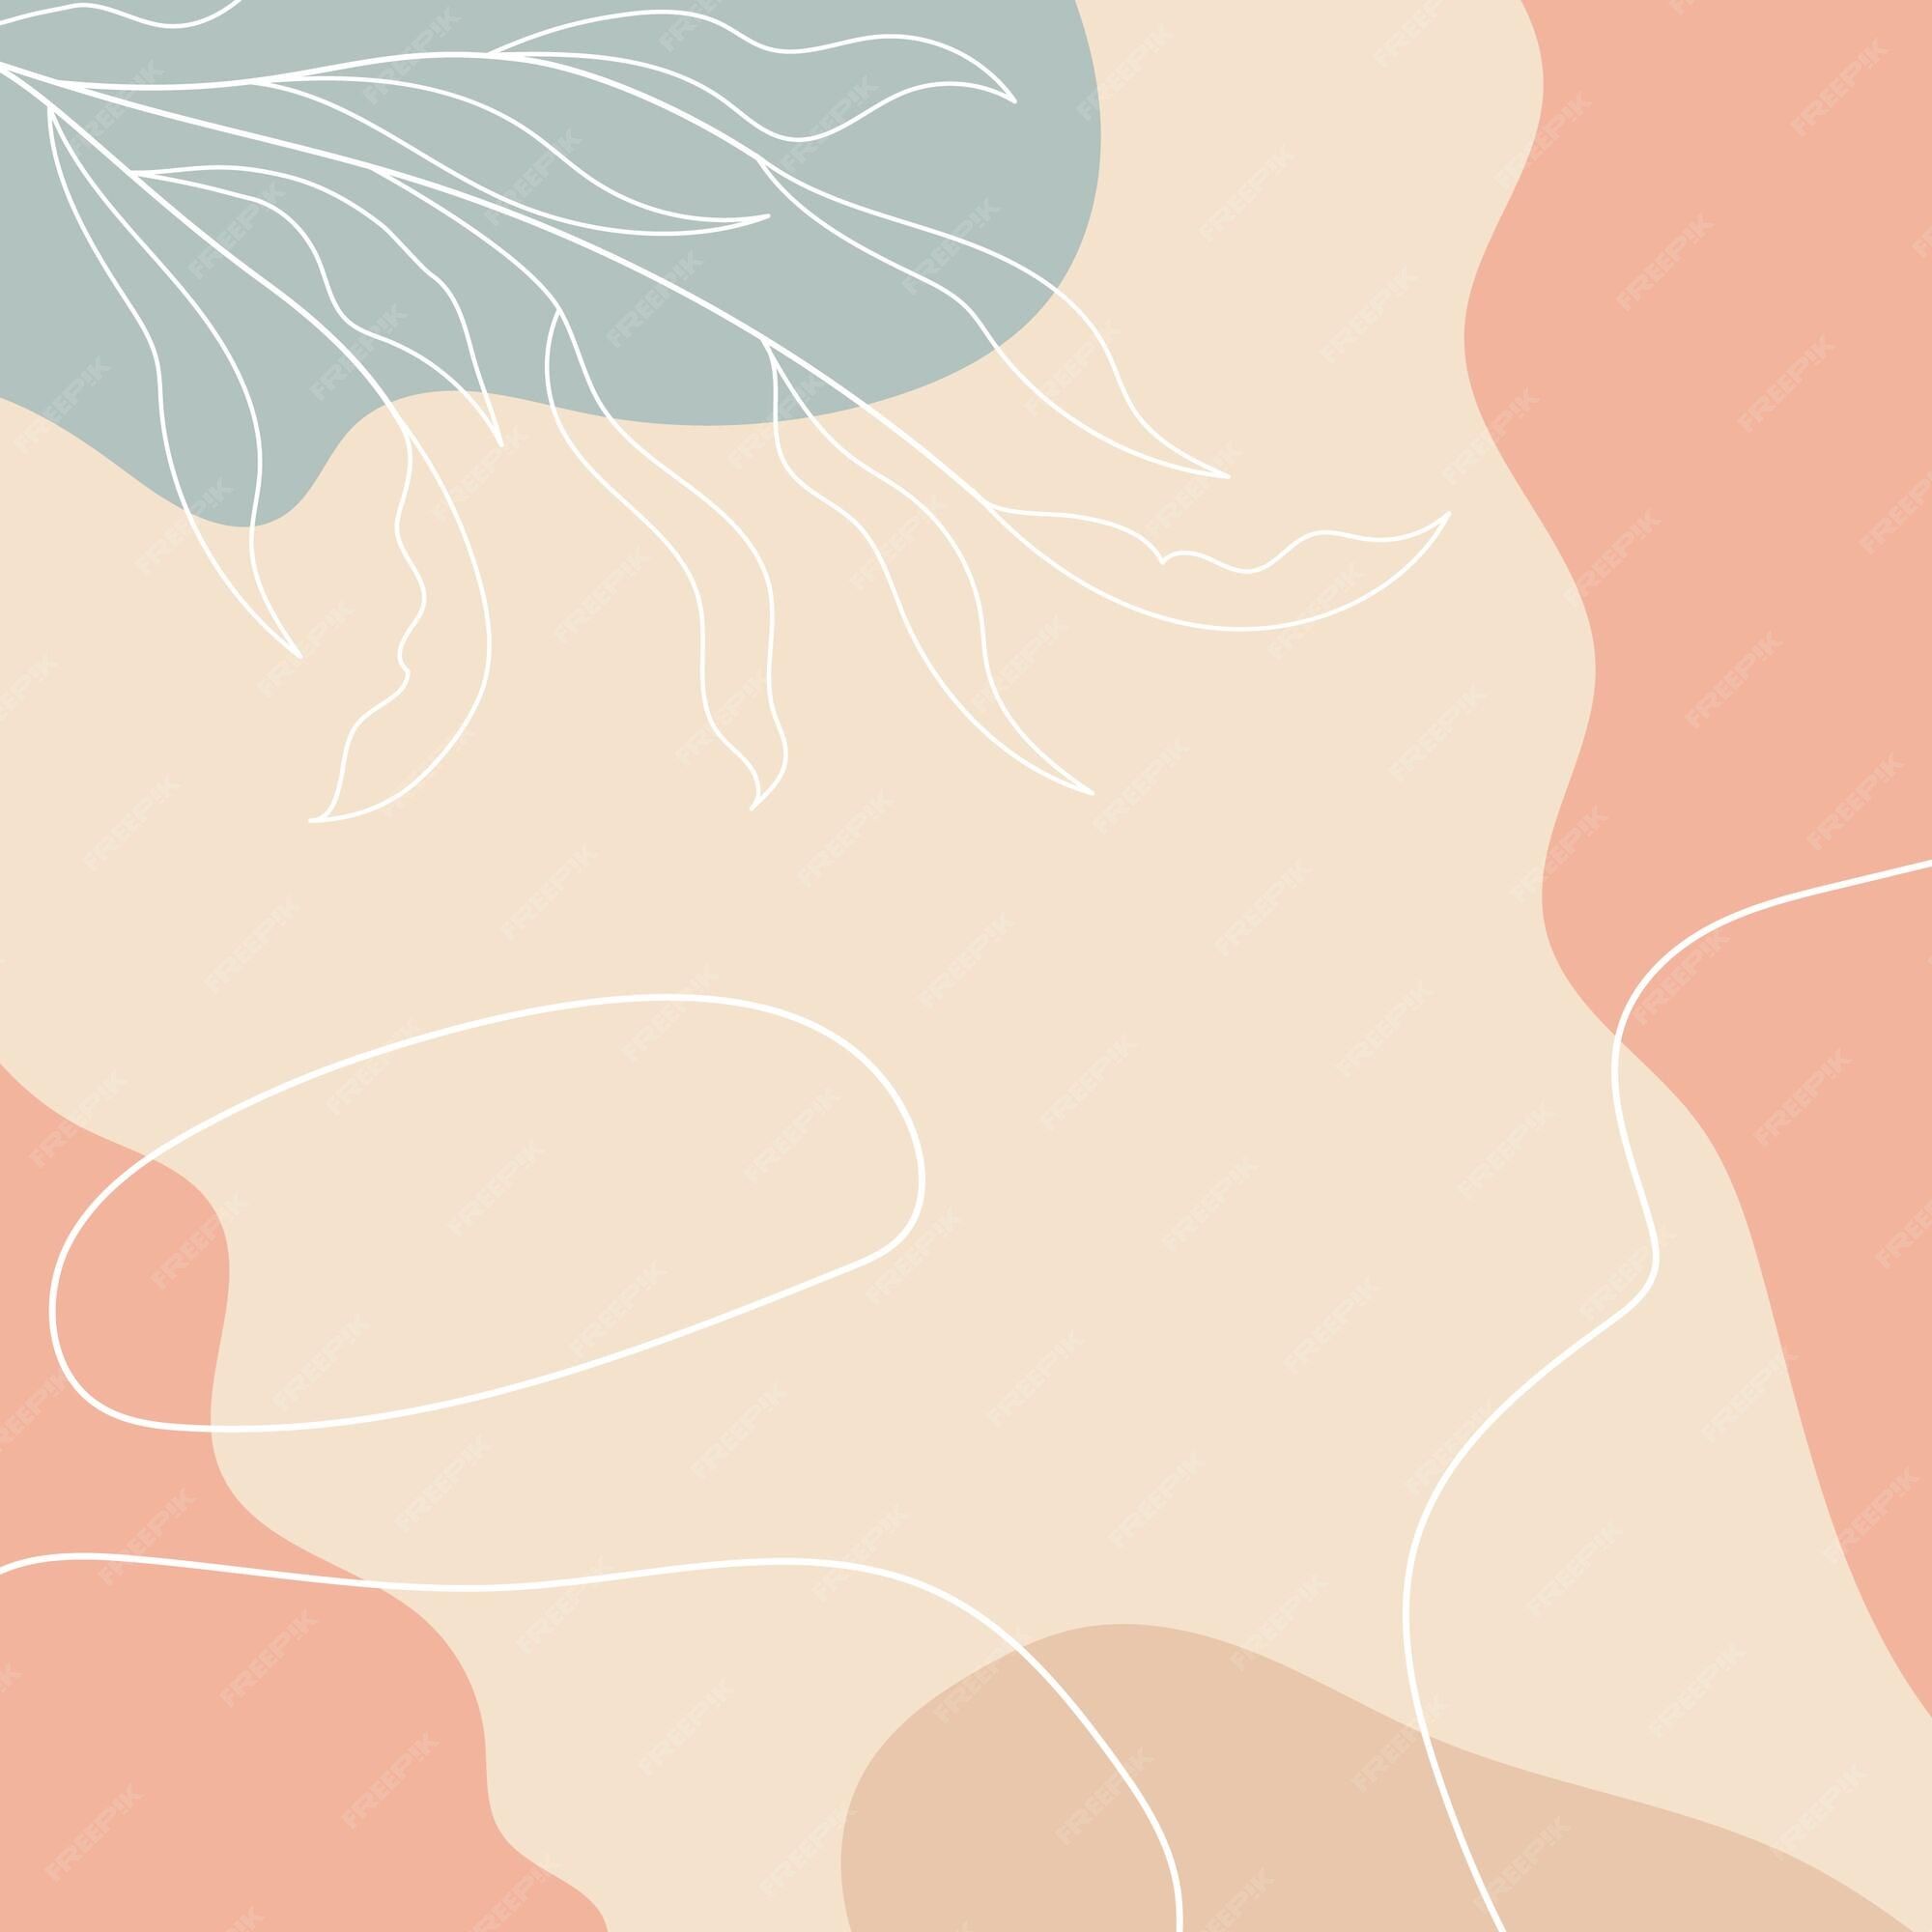 An abstract design with pastel colors and a branch - Terracotta